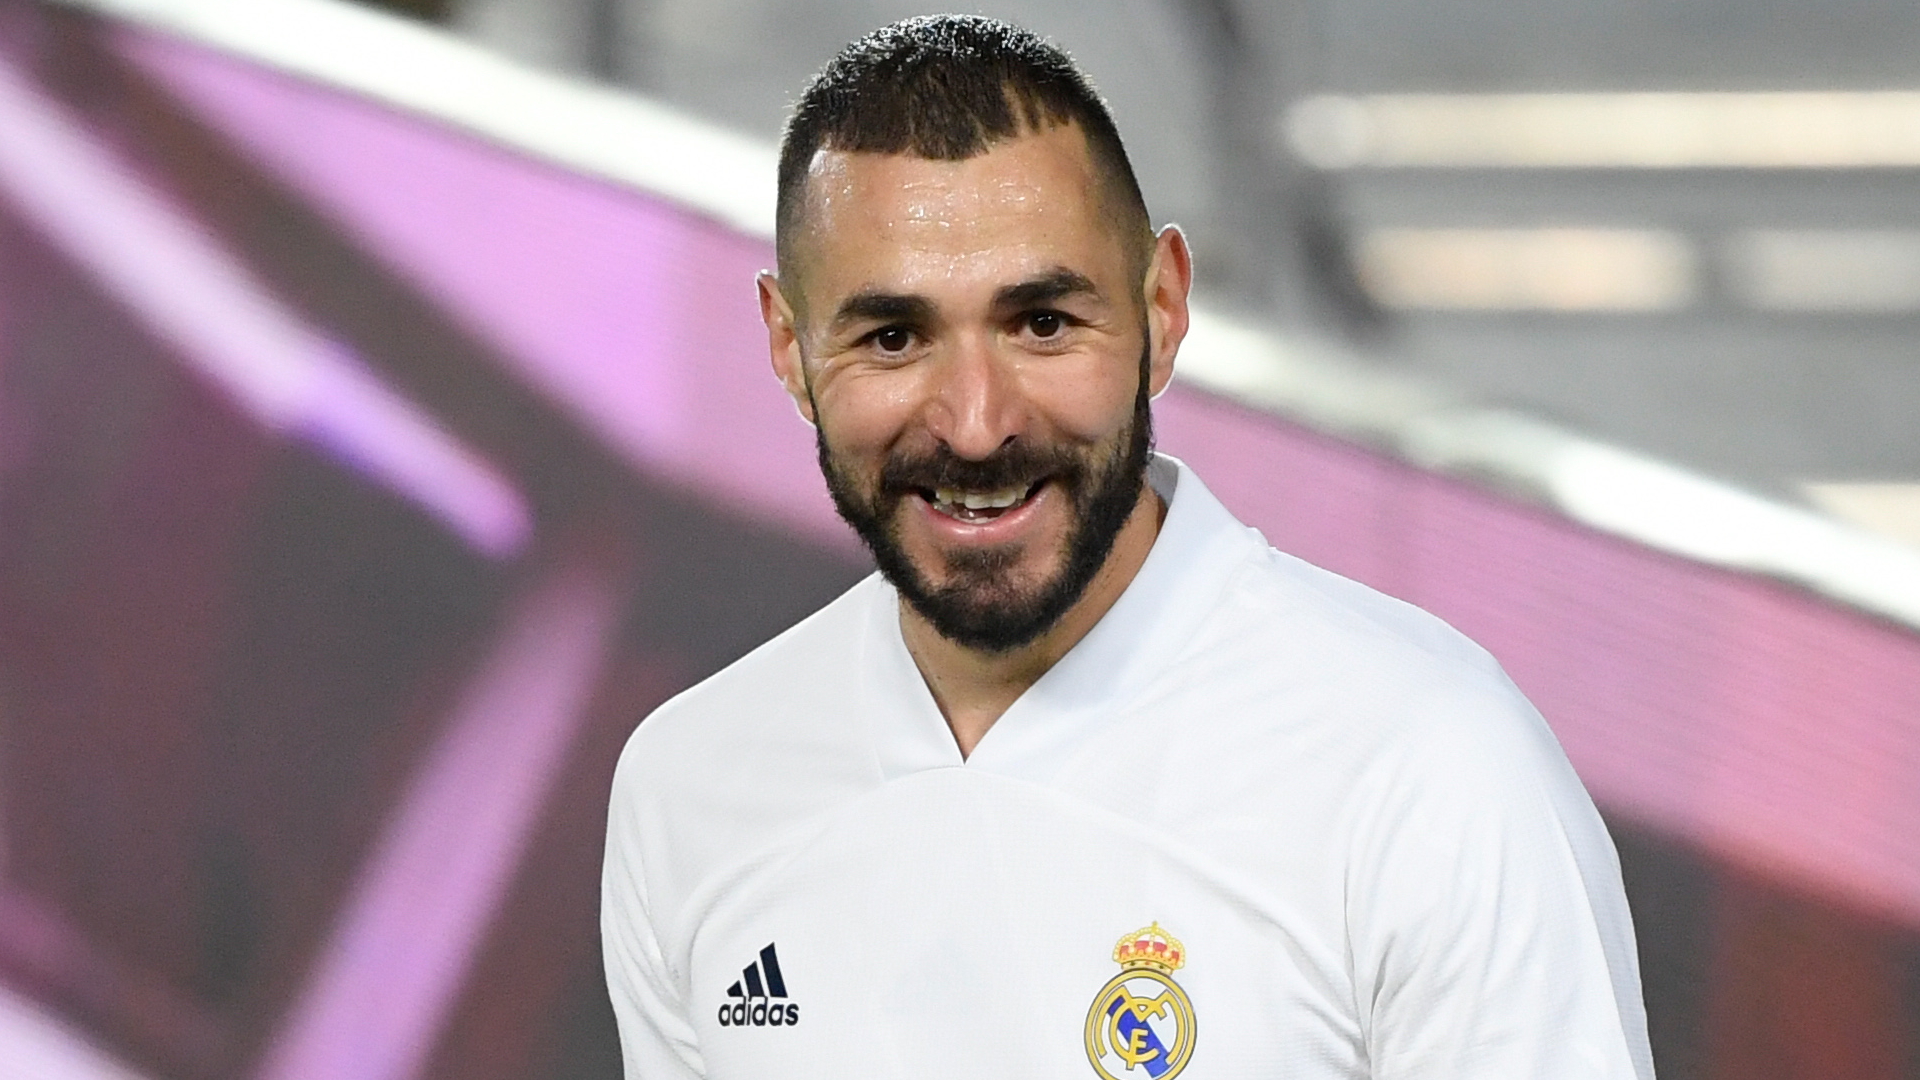 'Benzema is the best striker of his generation' - Papin lauds Real Madrid talisman